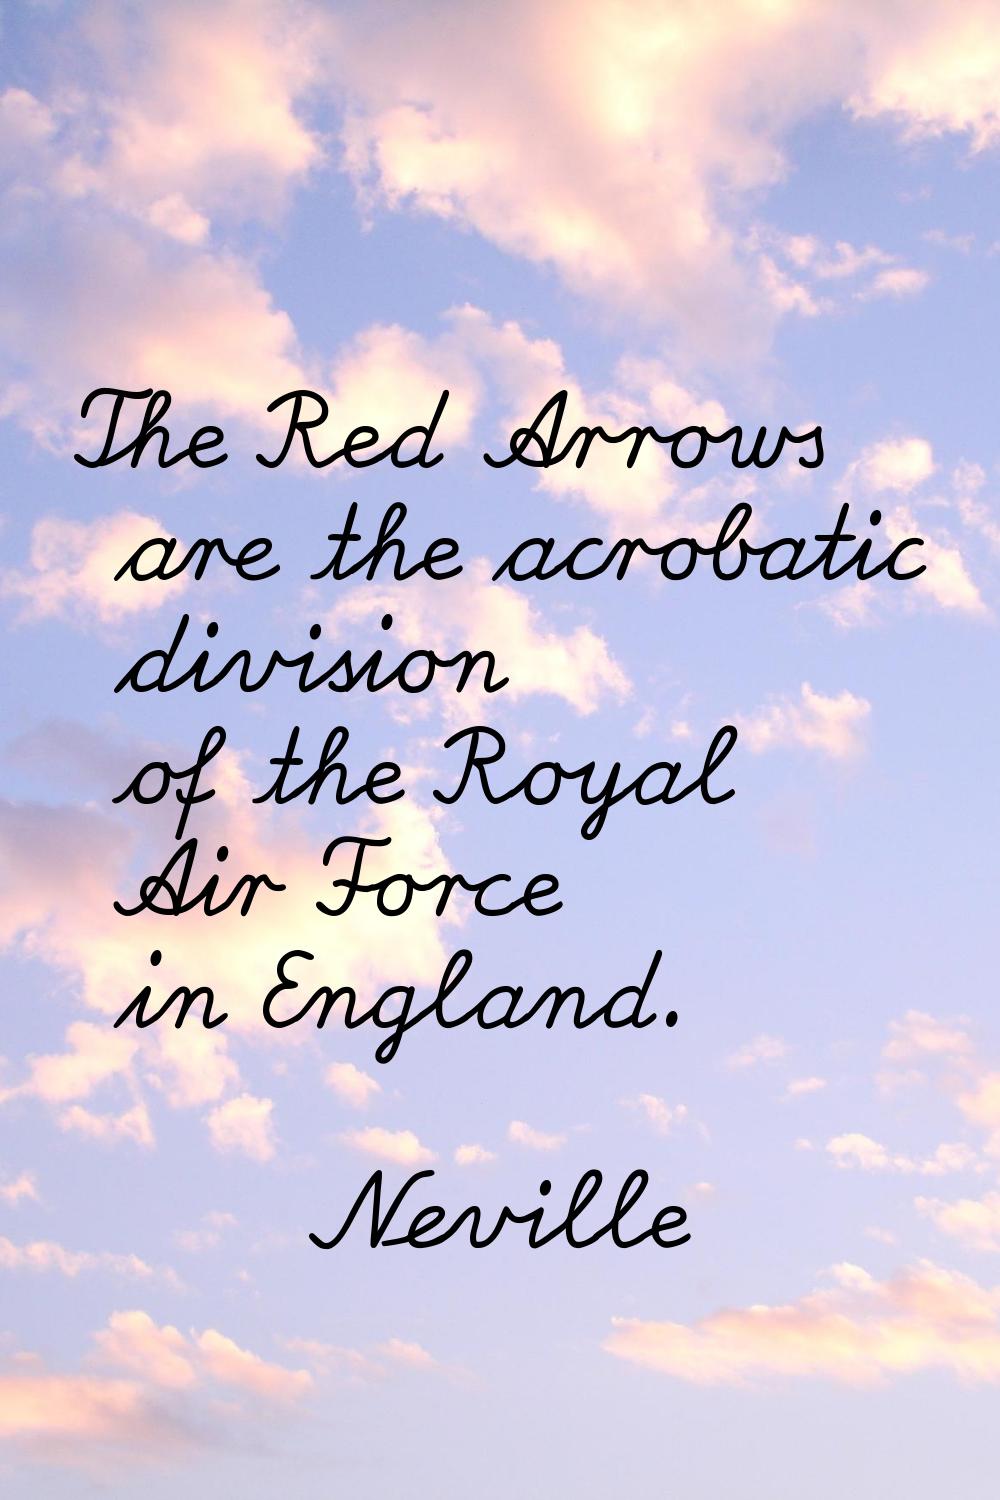 The Red Arrows are the acrobatic division of the Royal Air Force in England.